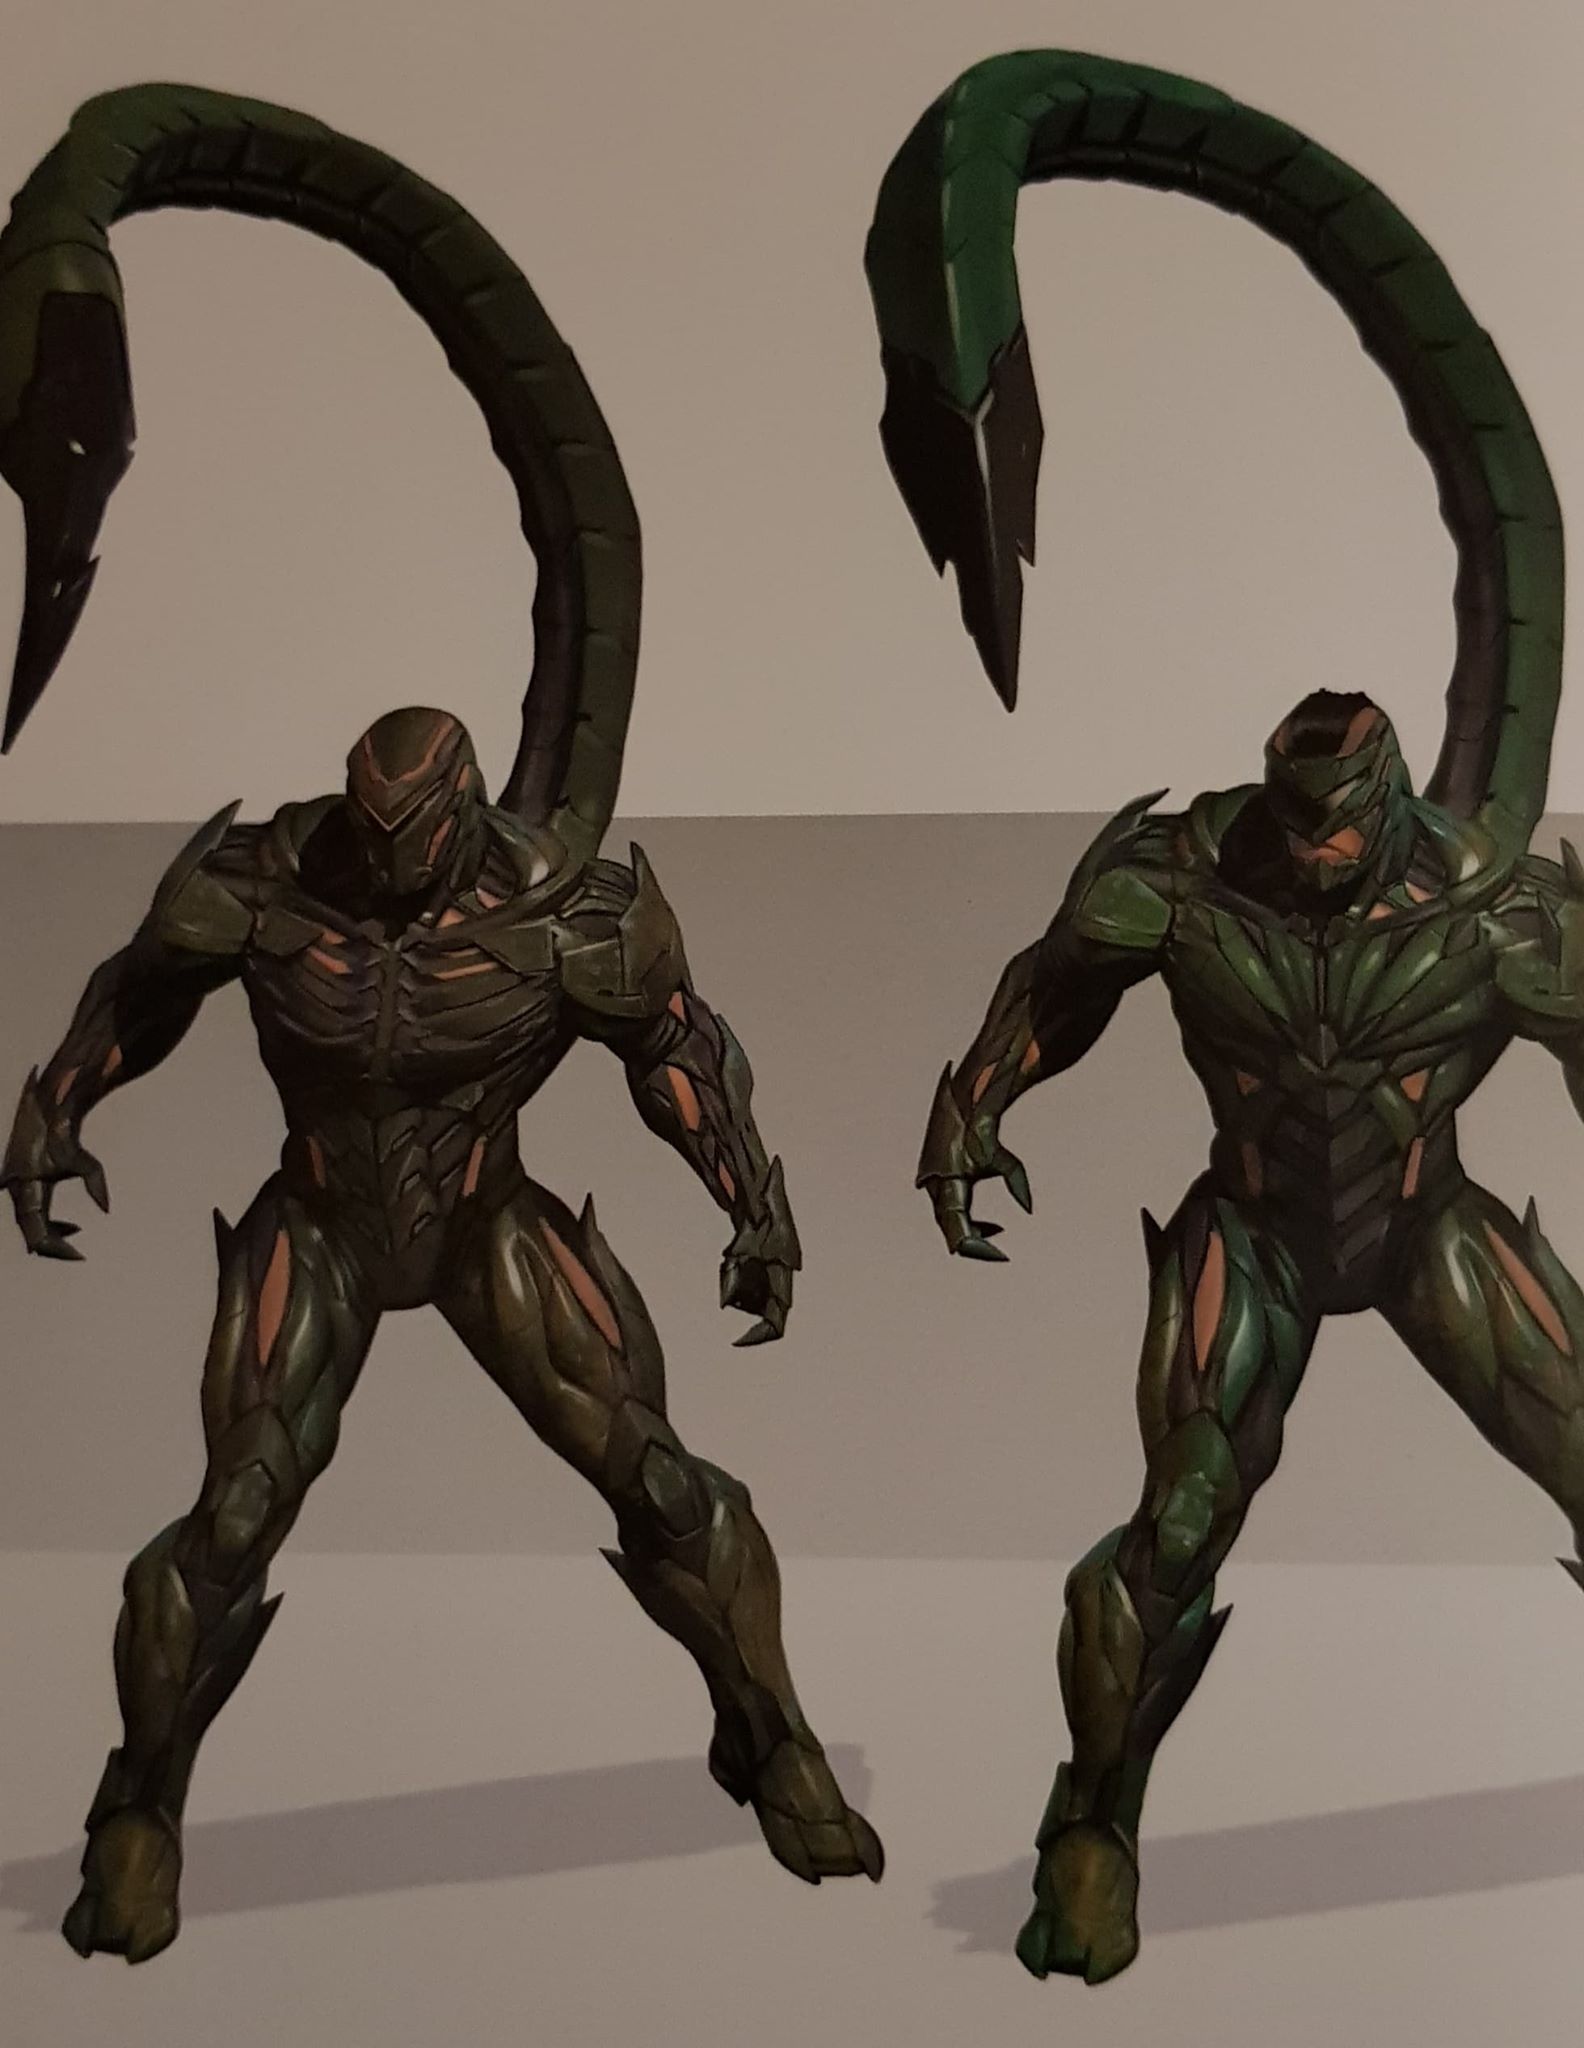 SPIDER-MAN PS4 Concept Art Features Alternate Designs For ...